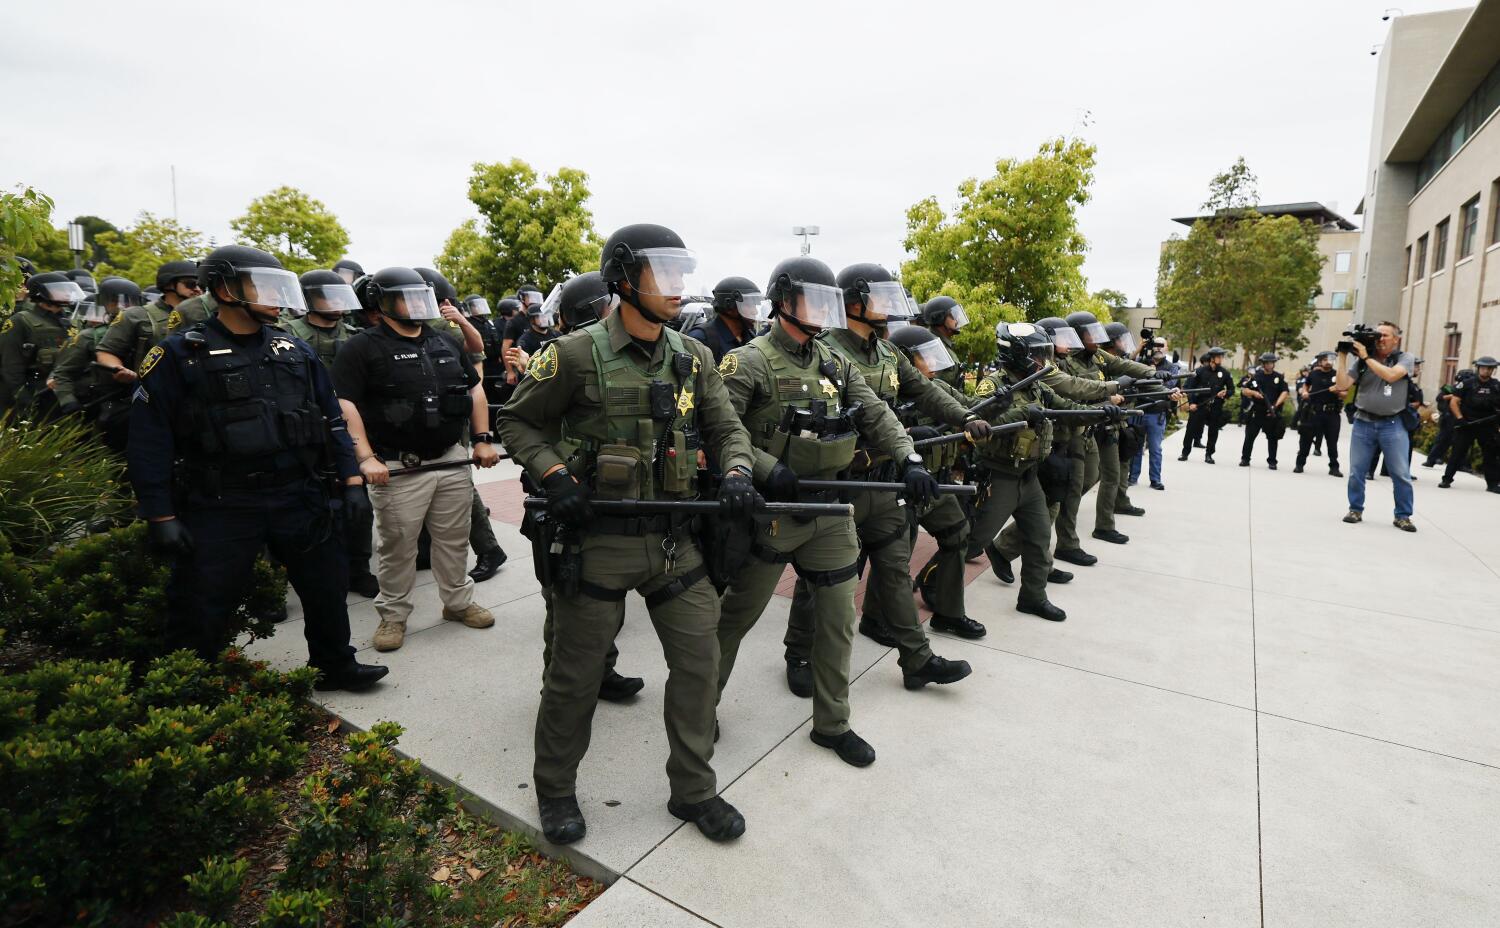 Police converge on pro-Palestinian protest at UC Irvine after a building is occupied